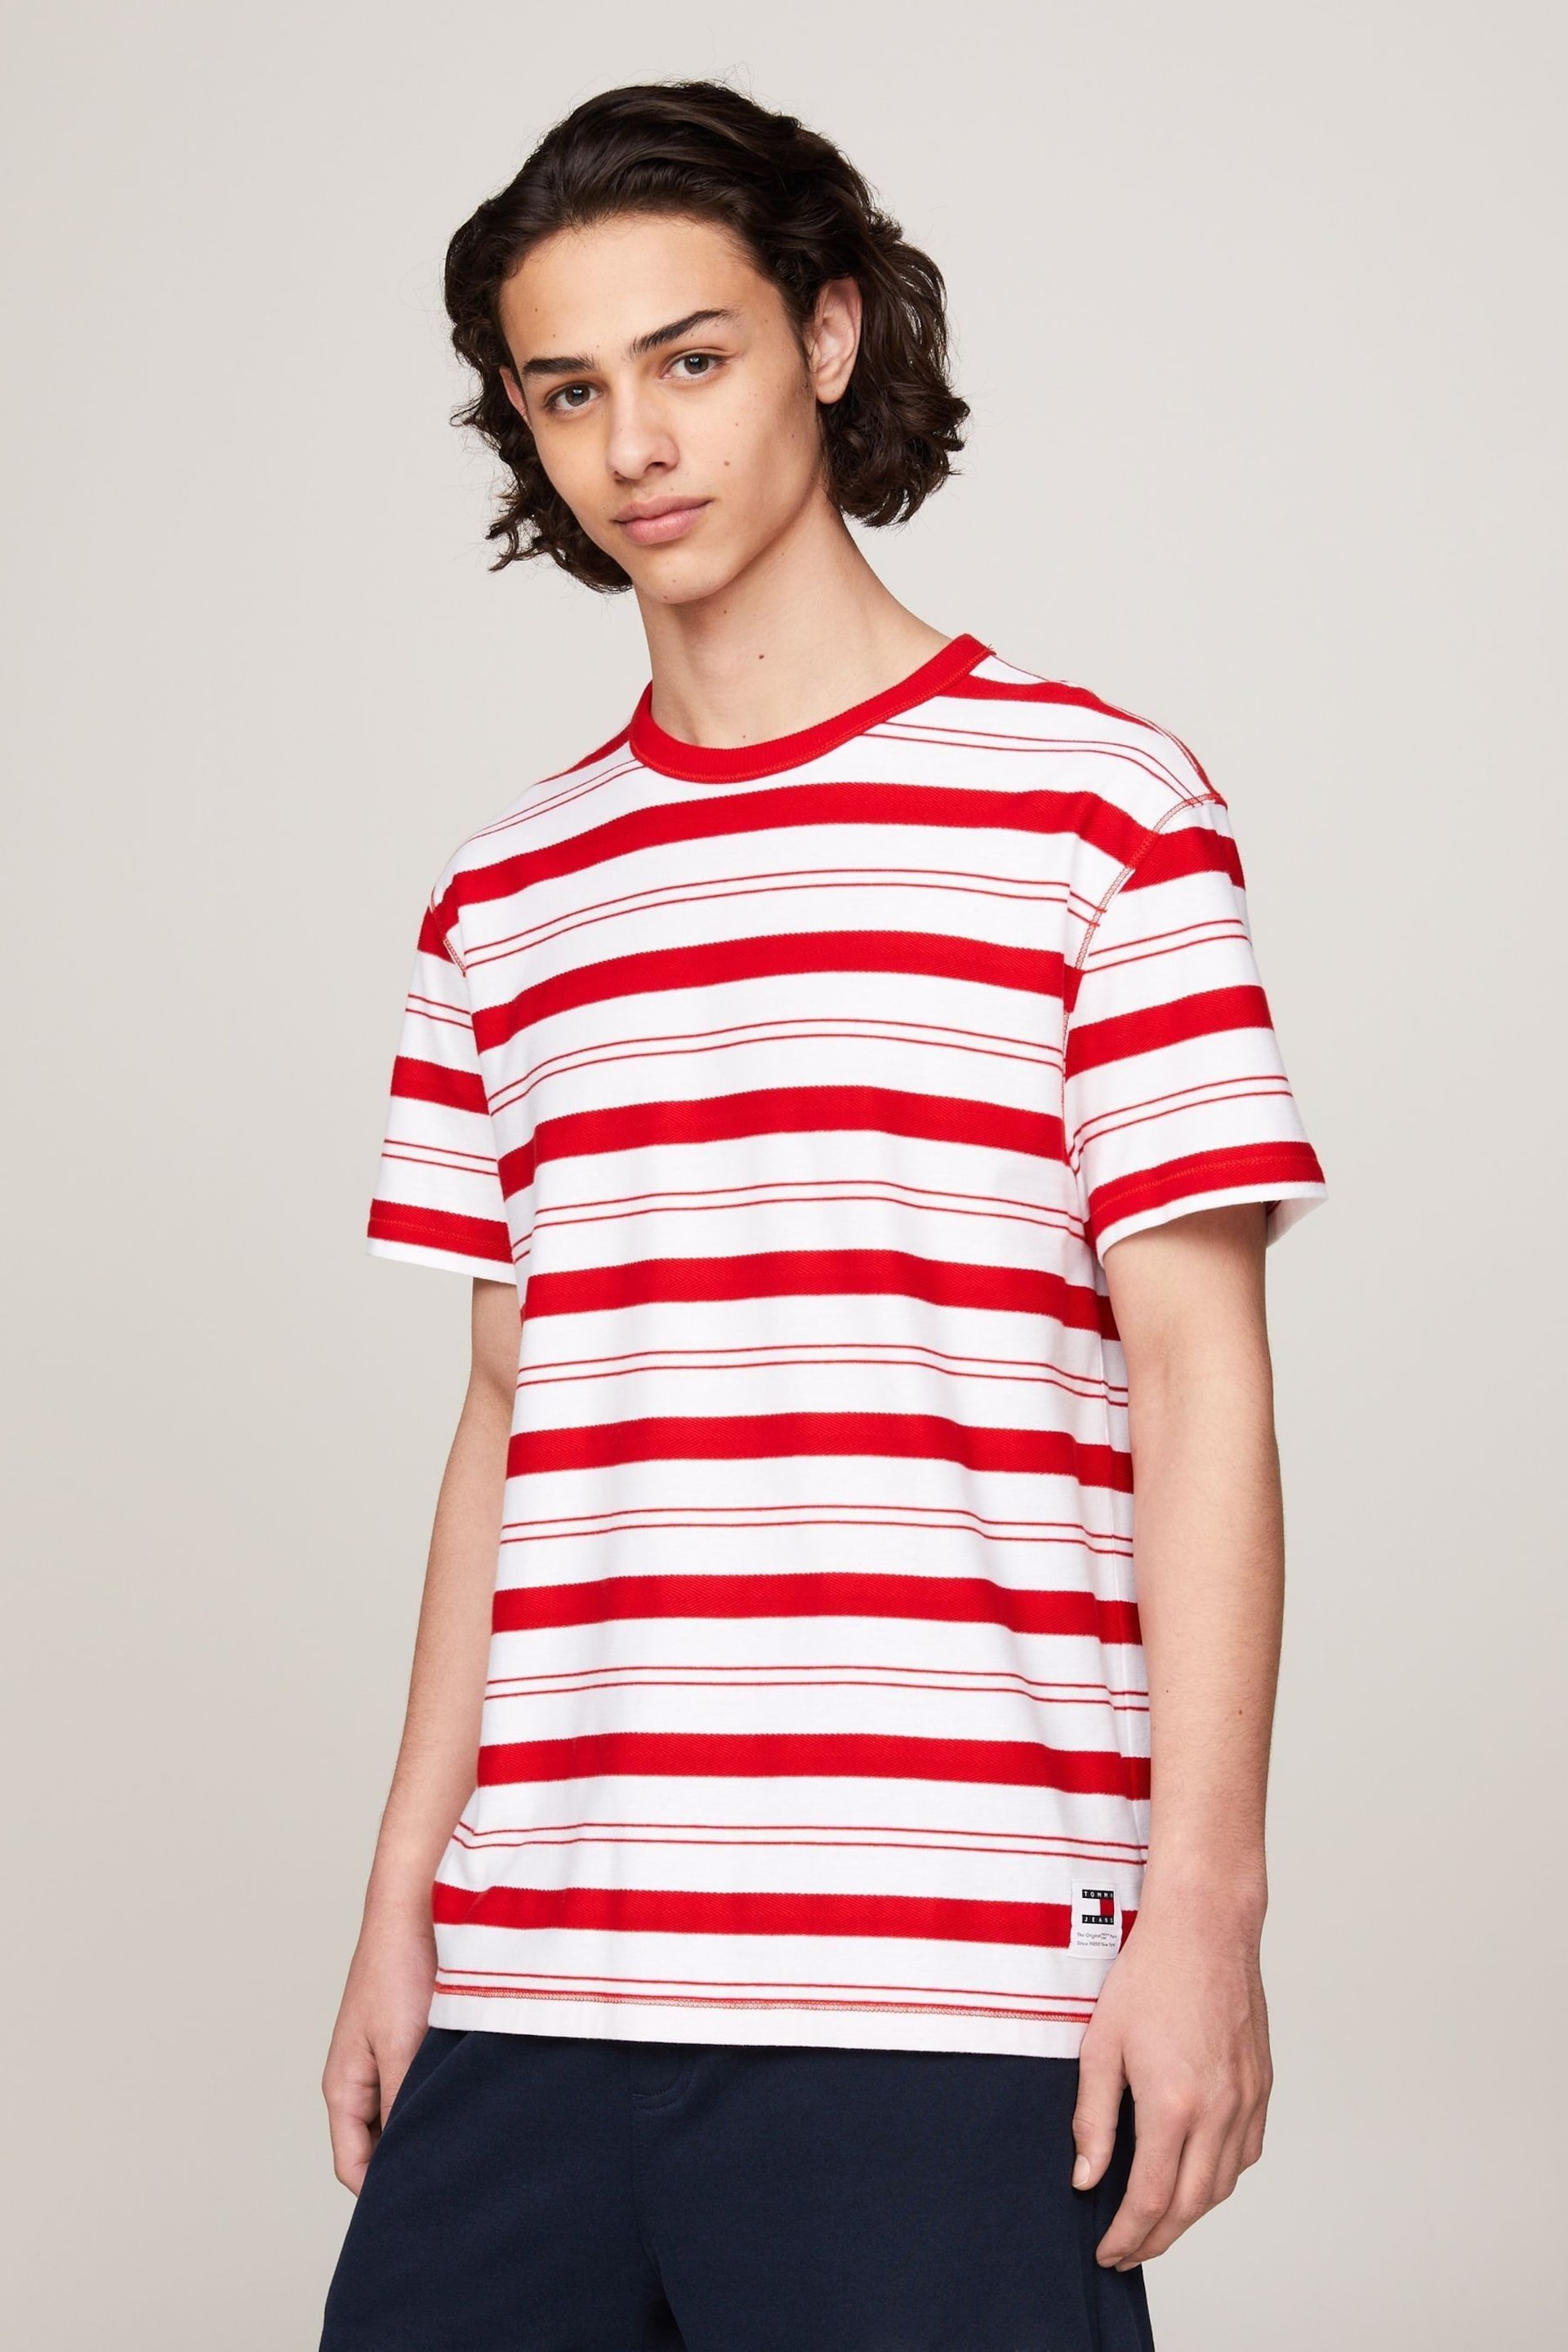 Tommy Jeans Red Stripe T-Shirt - Image 4 of 8